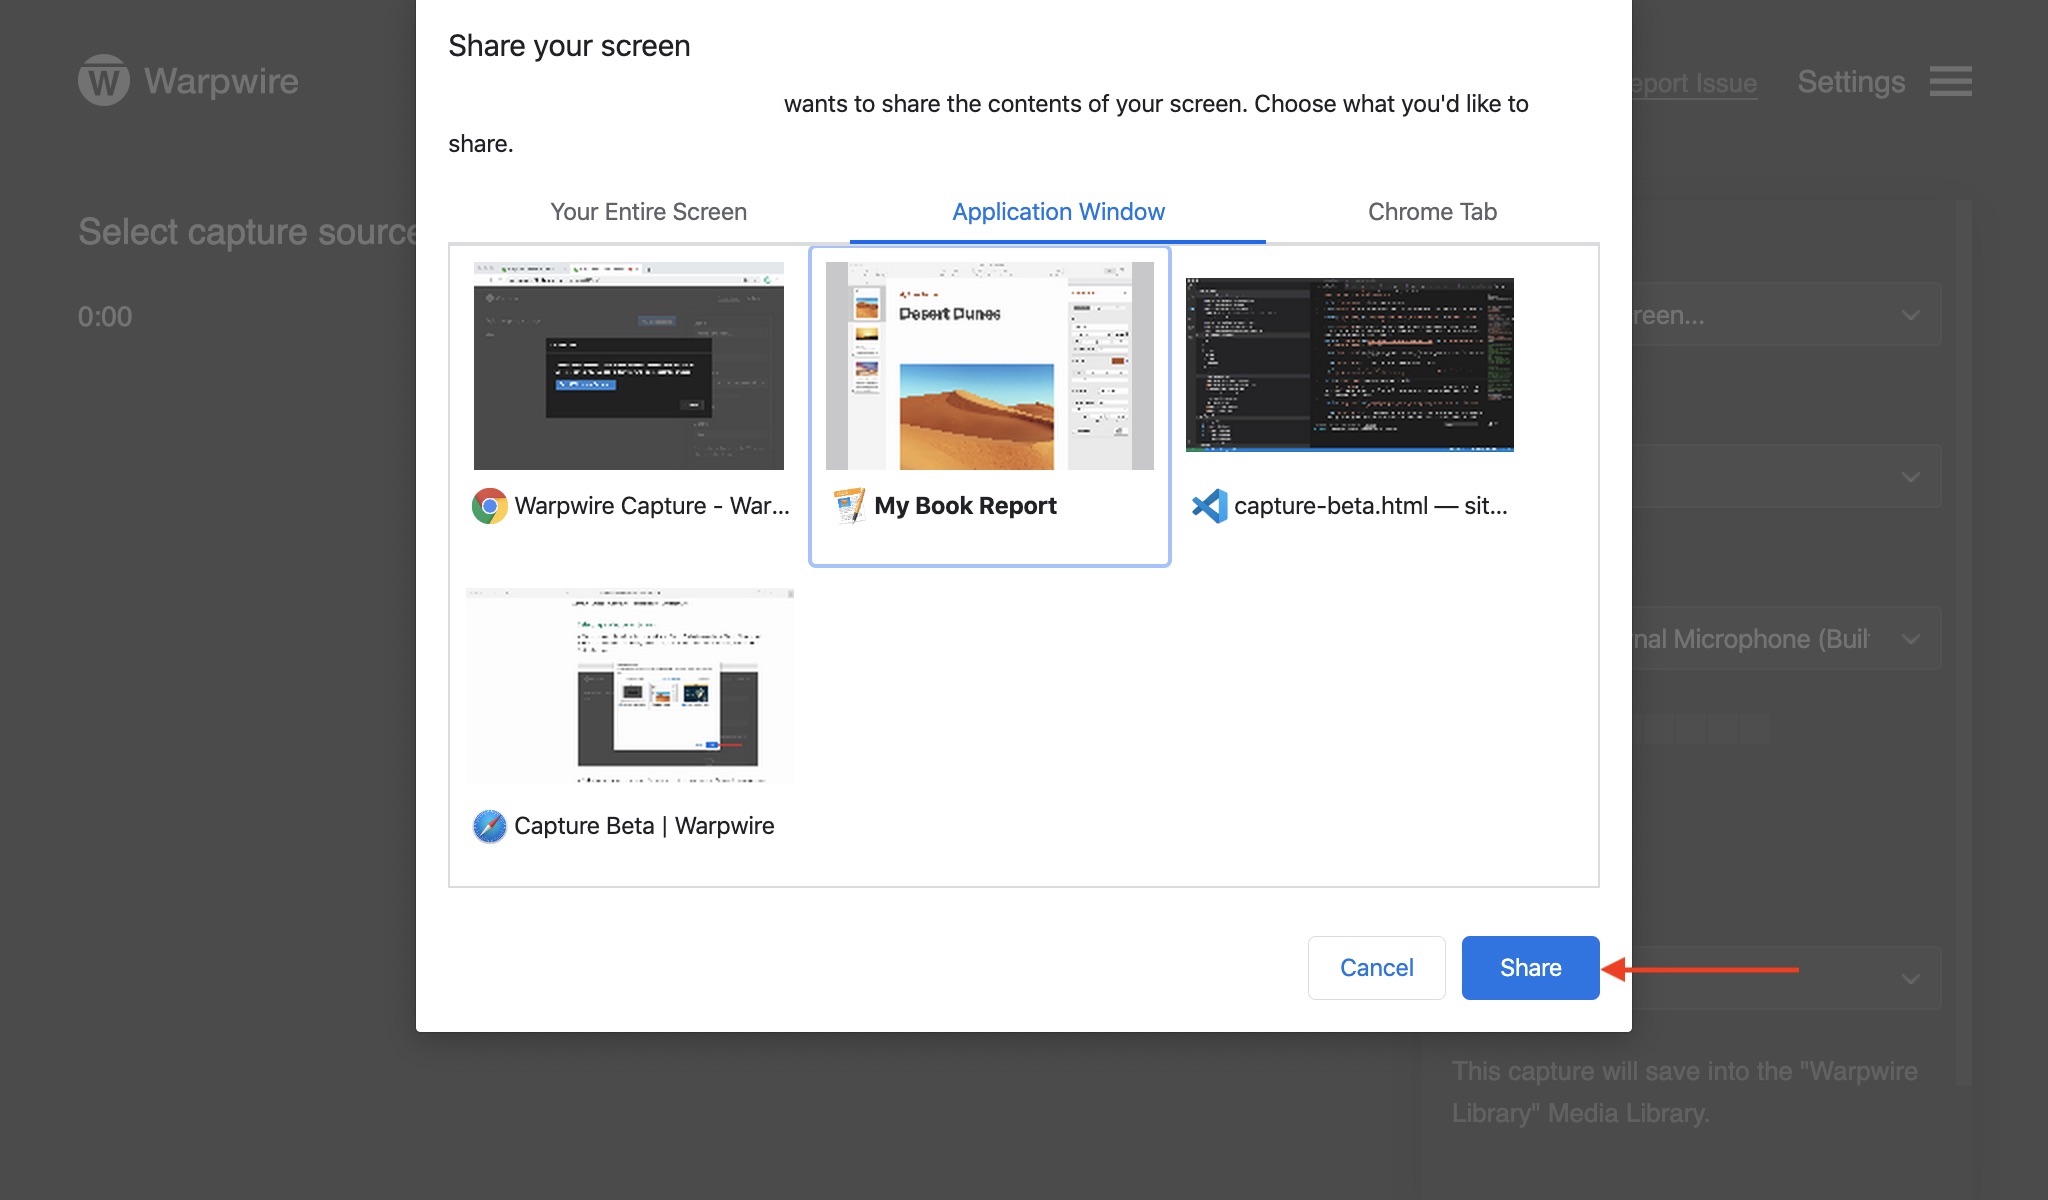 When ready, click share to choose your display for Video 1 in Warpwire Multi-Source Capture.